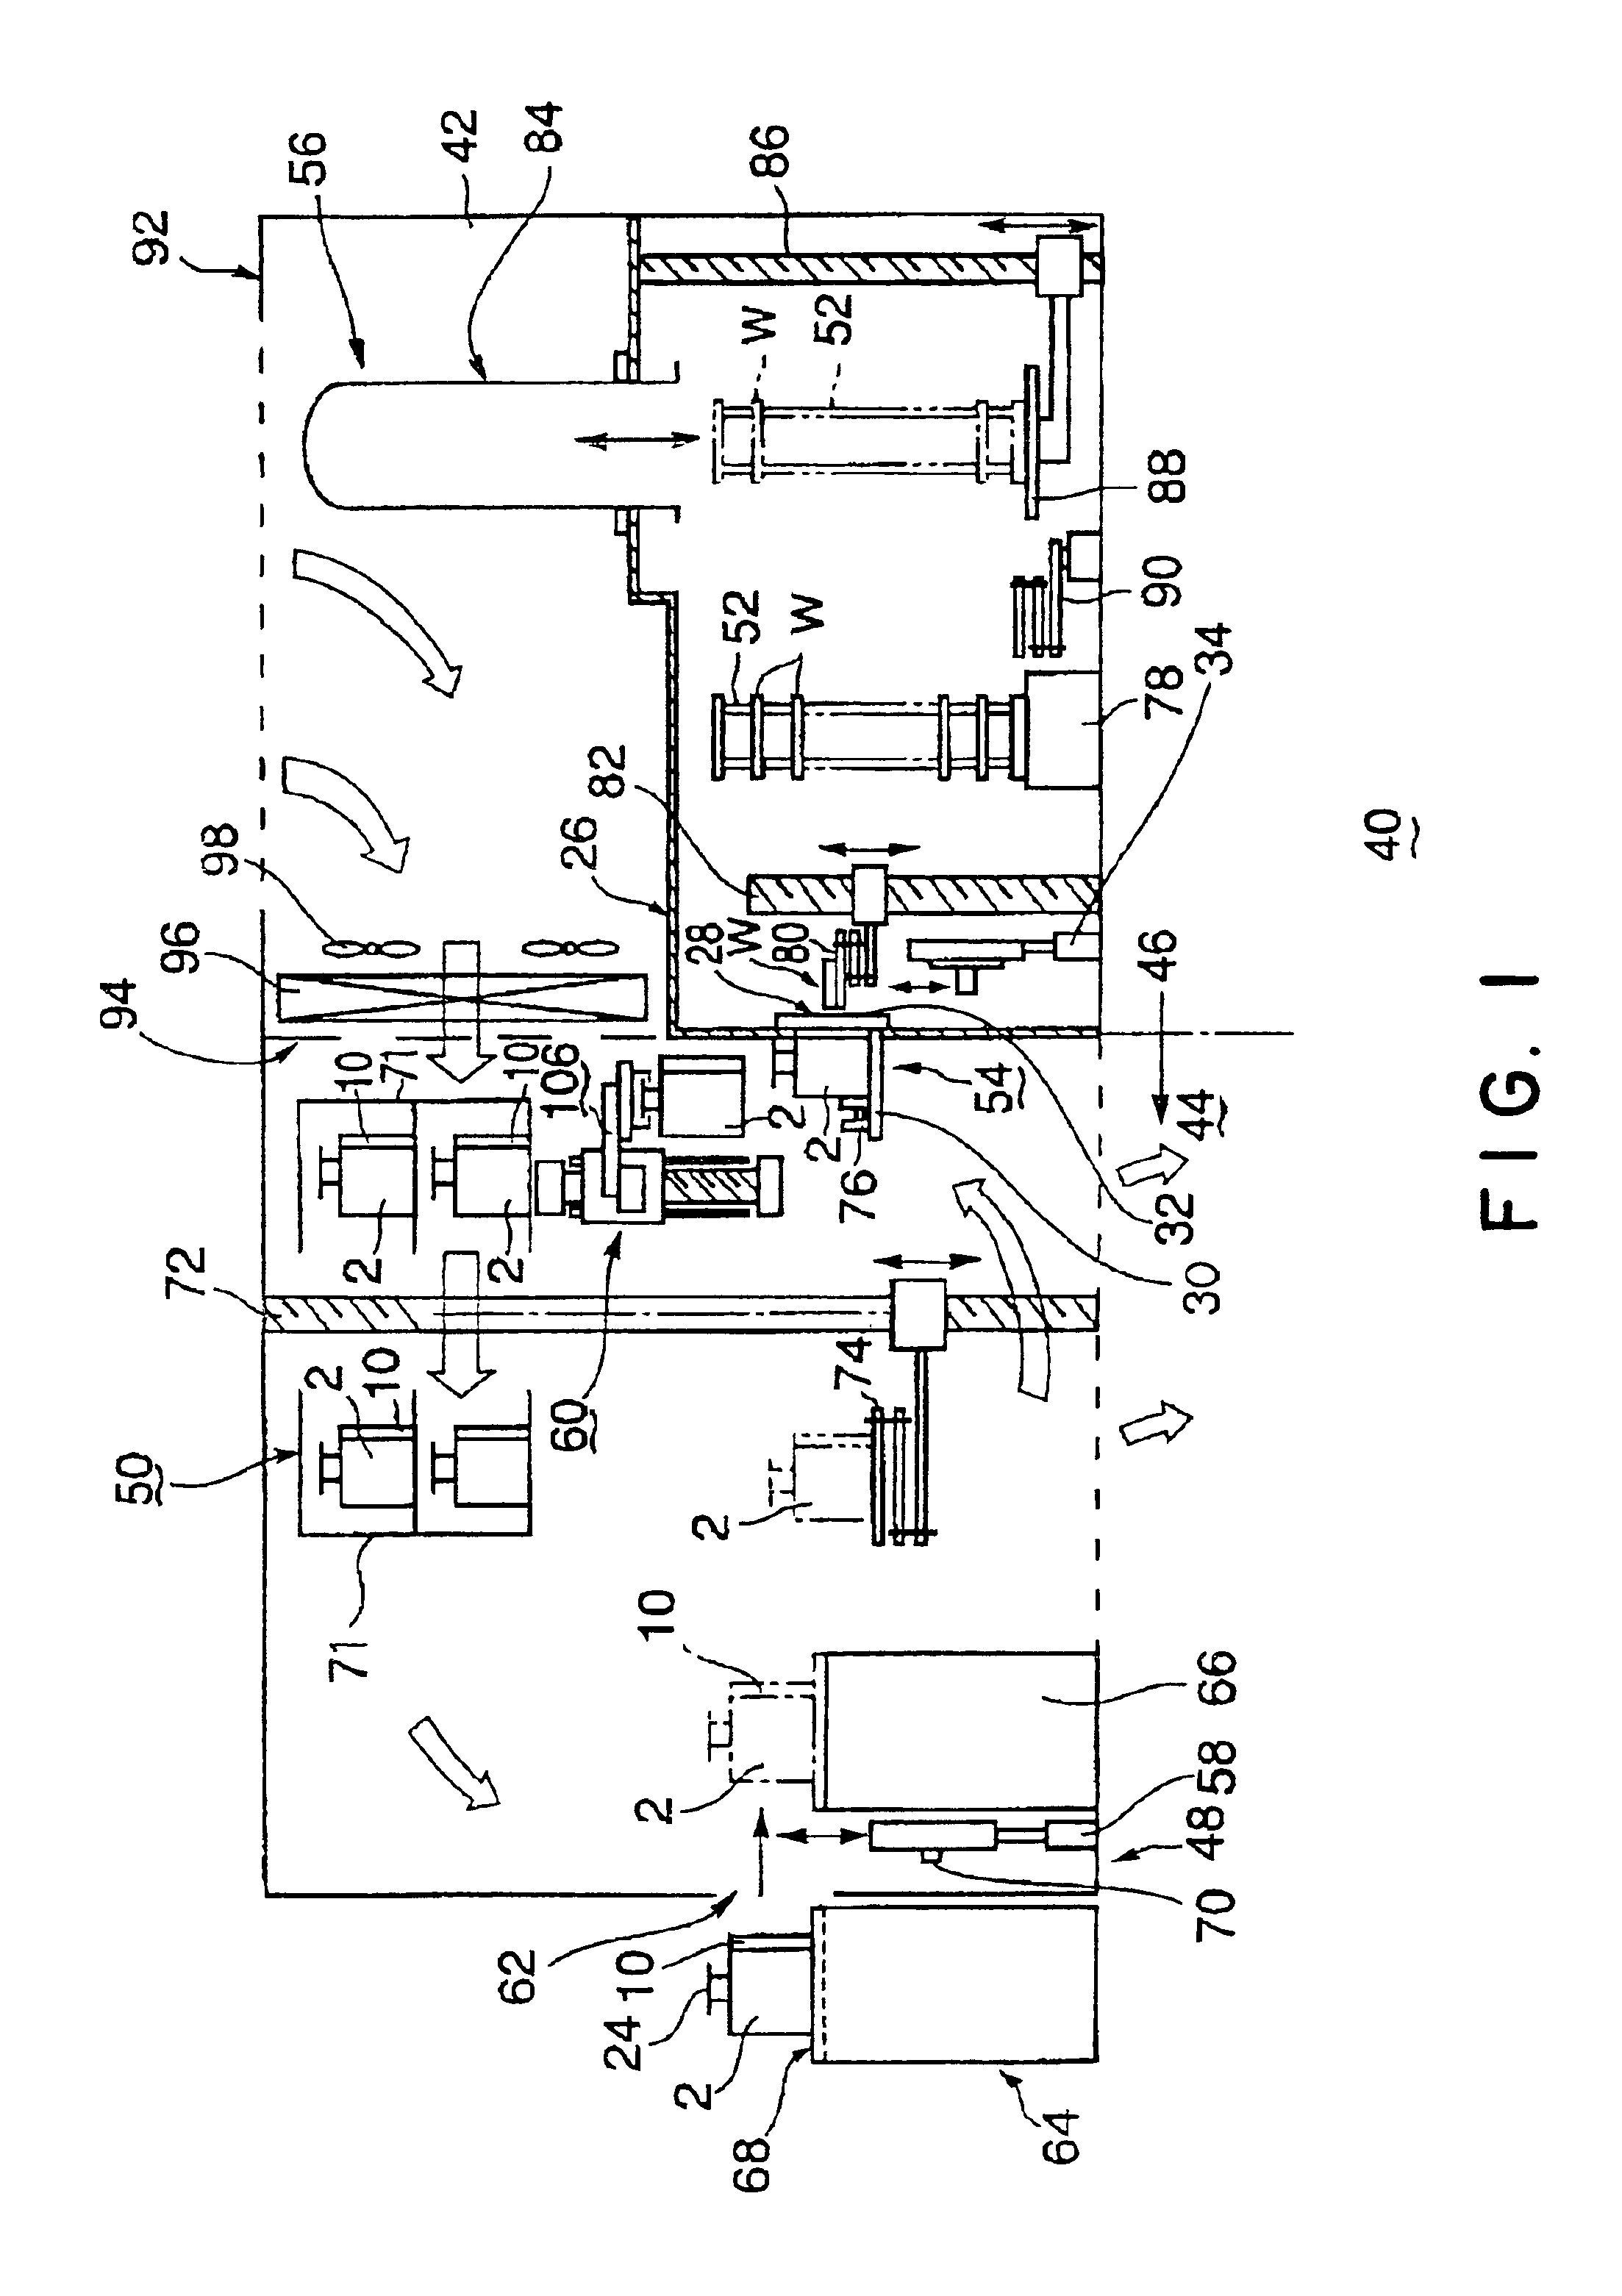 Heat treatment system and a method for cooling a loading chamber